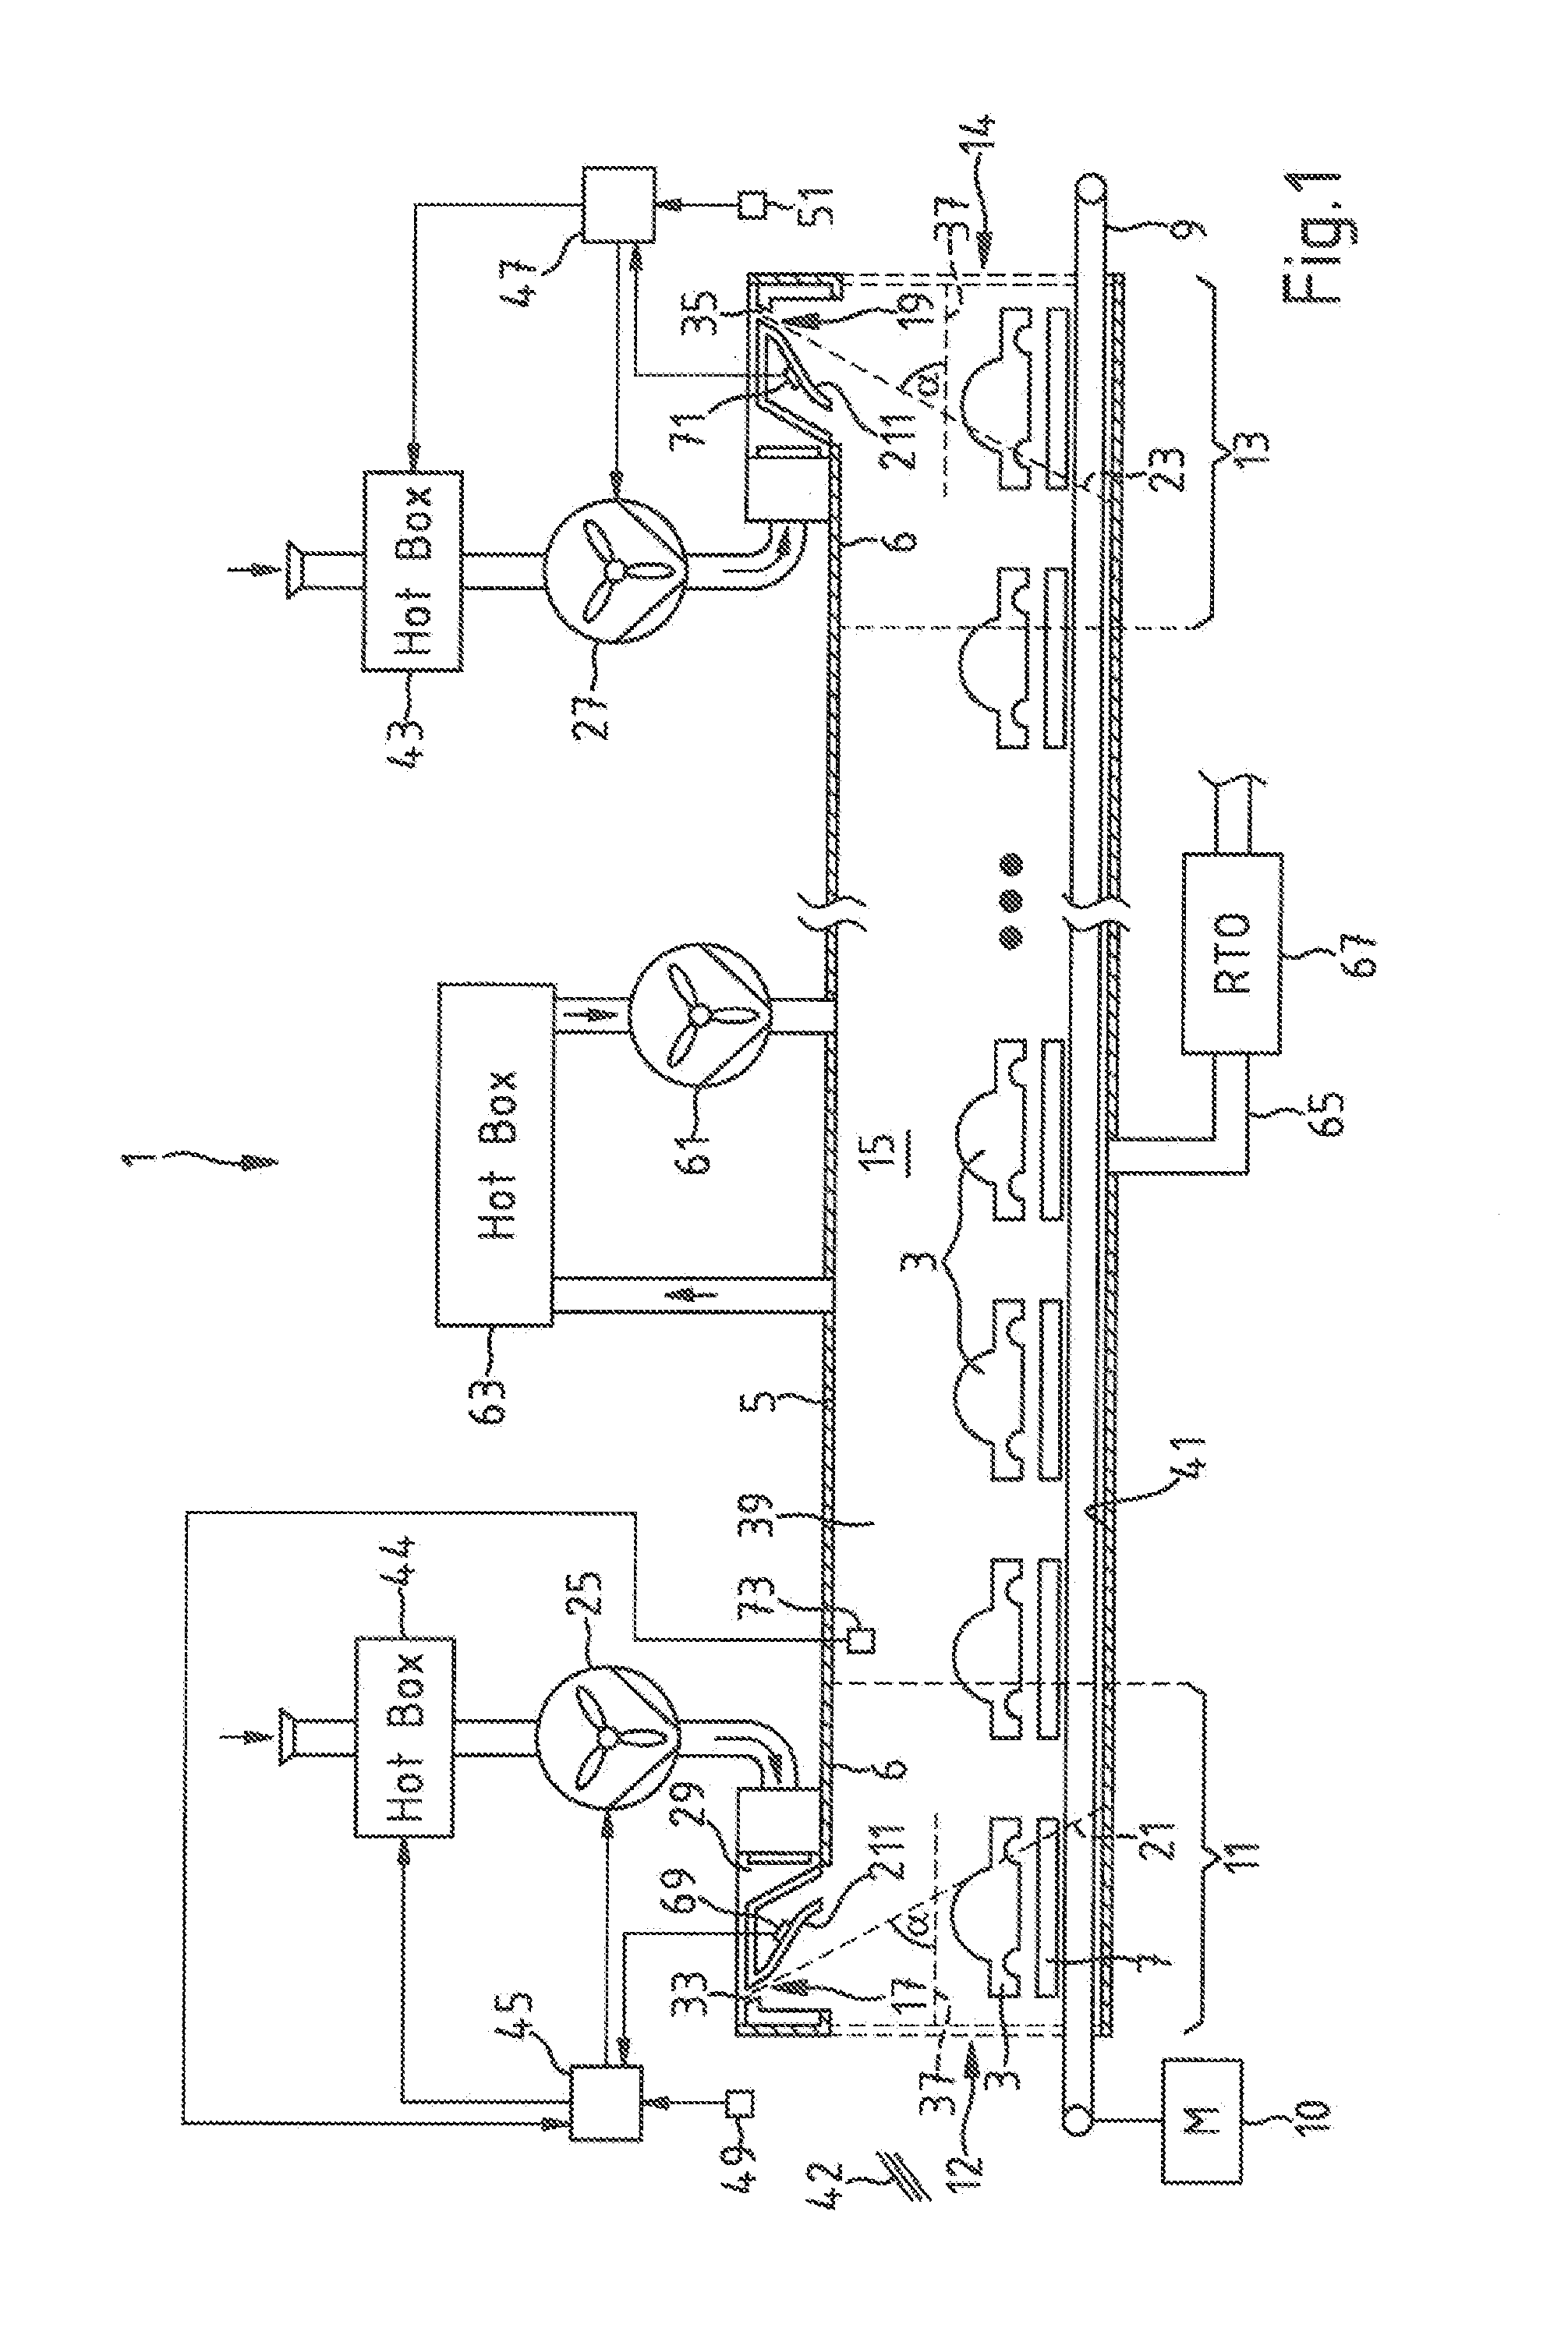 Process chamber incorporating an arrangement for injecting gaseous fluid thereinto